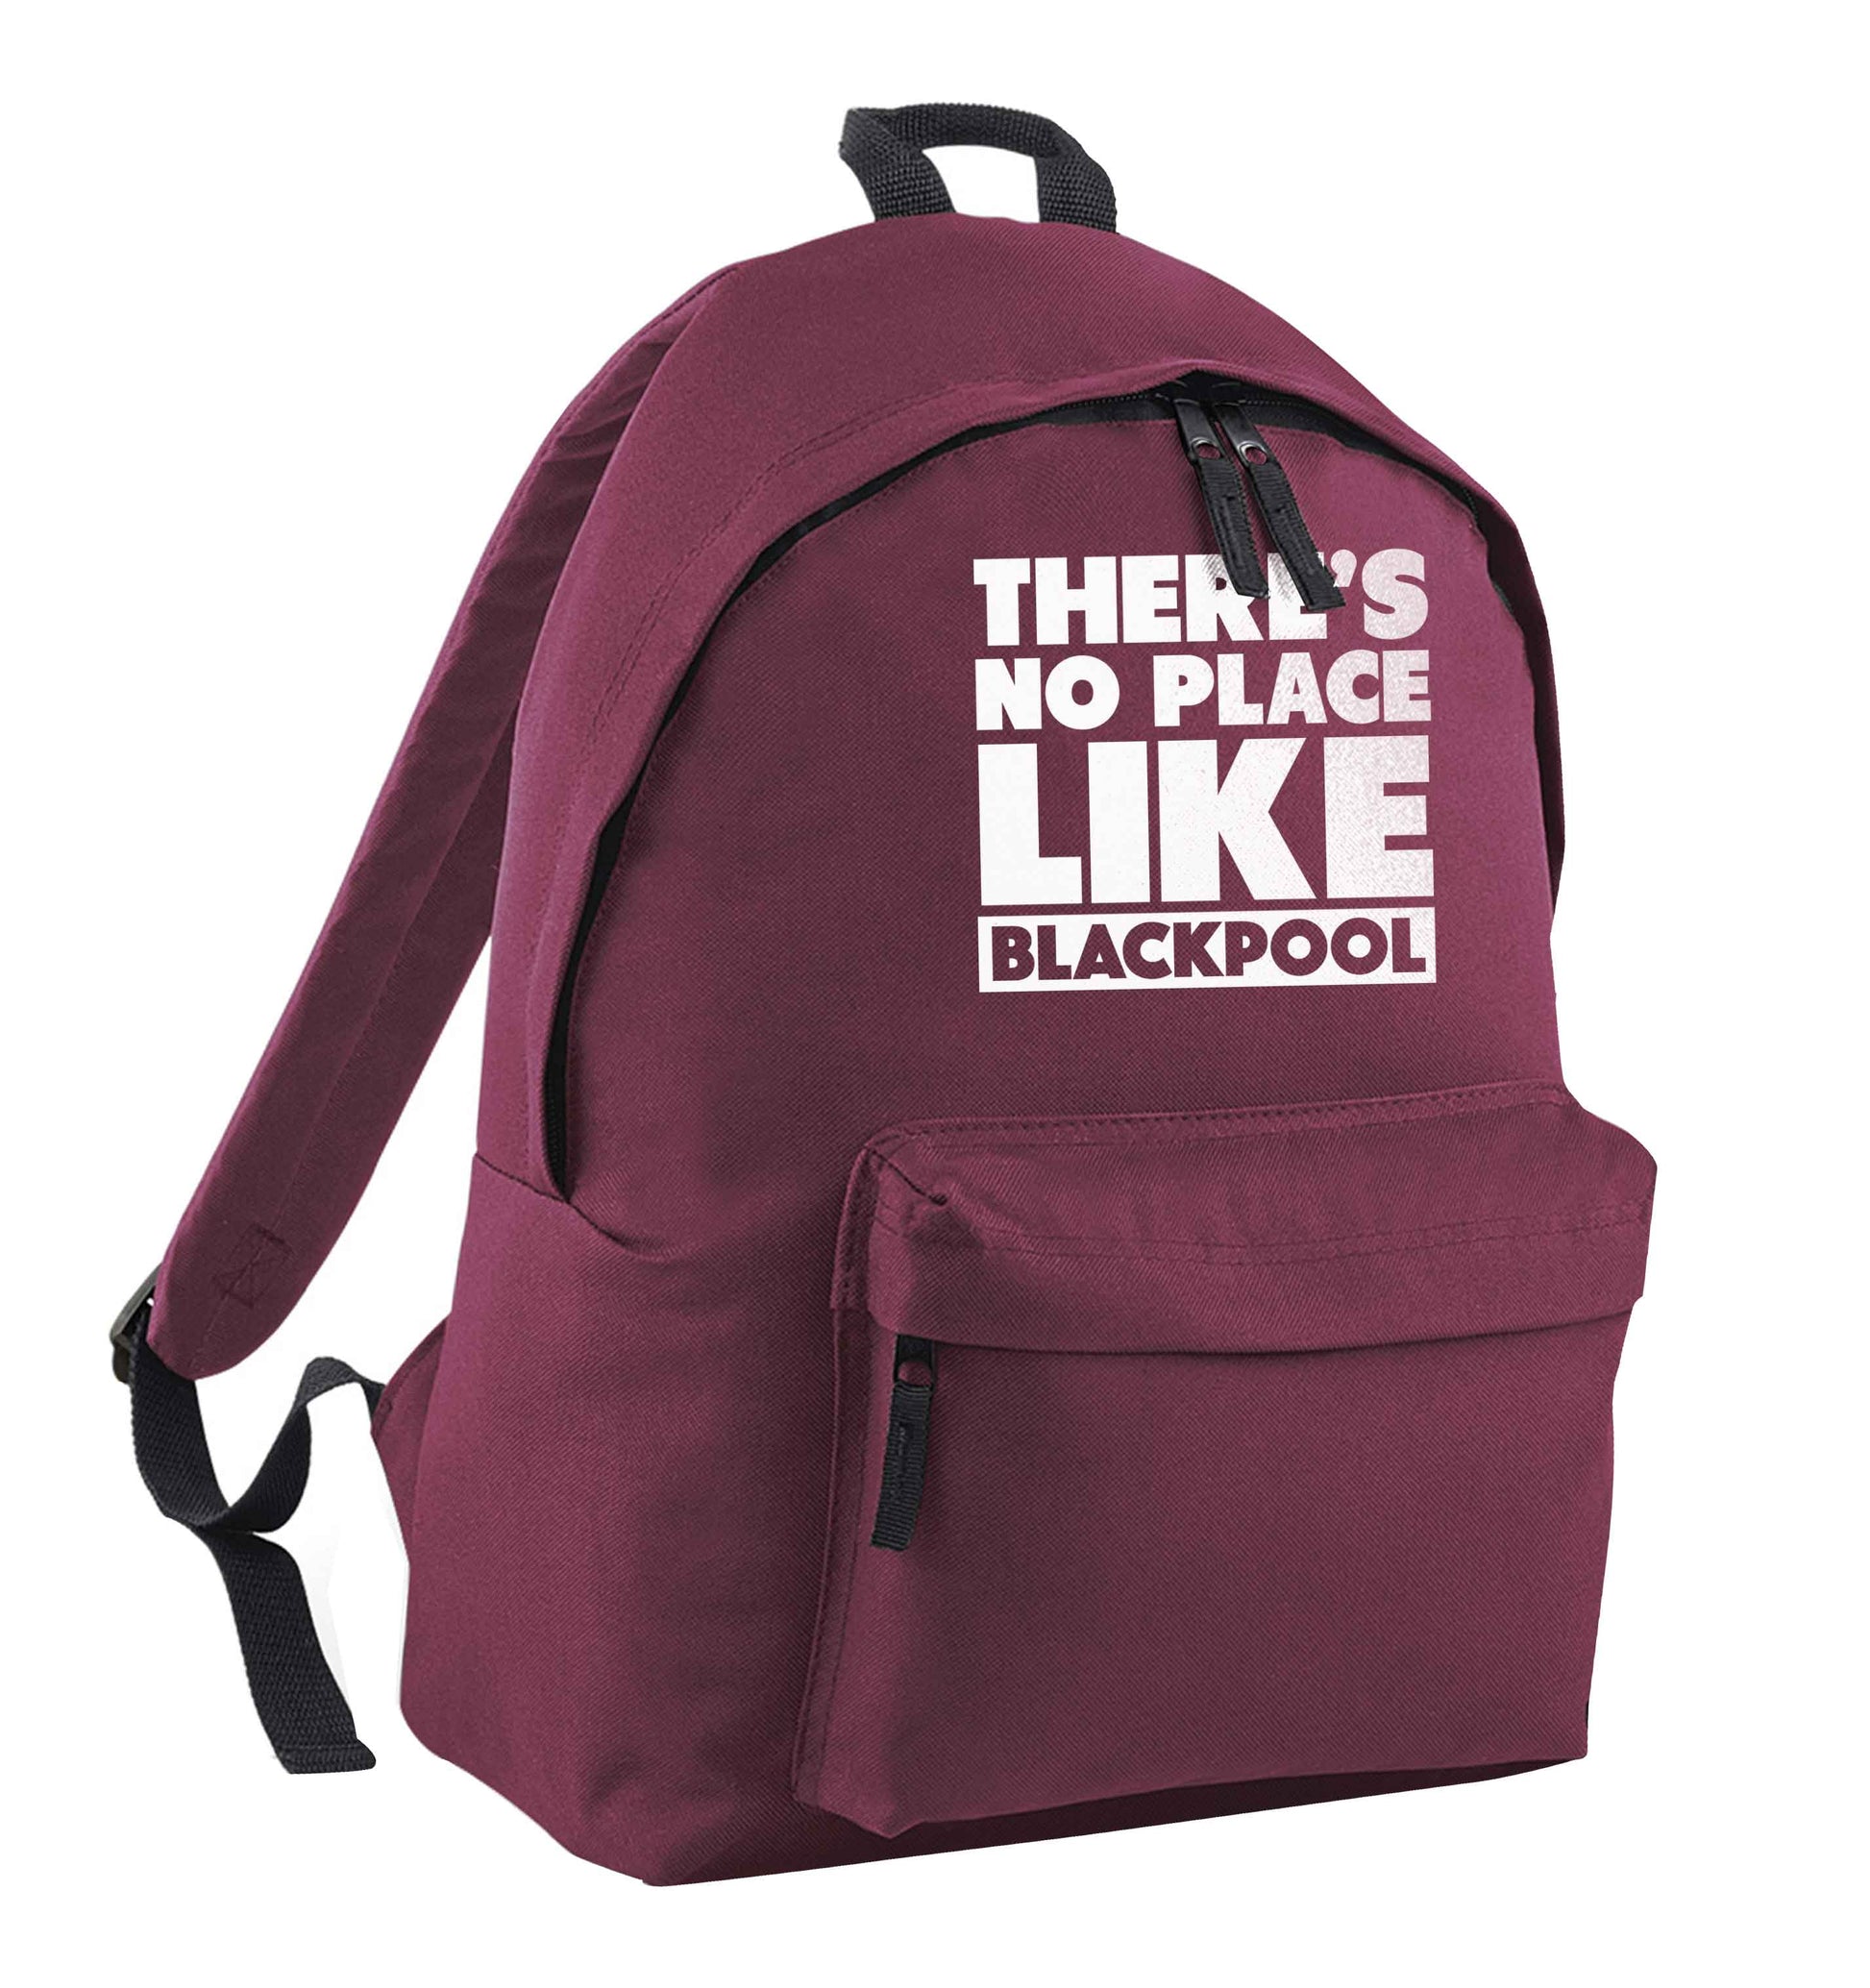 There's no place like Blackpool maroon adults backpack